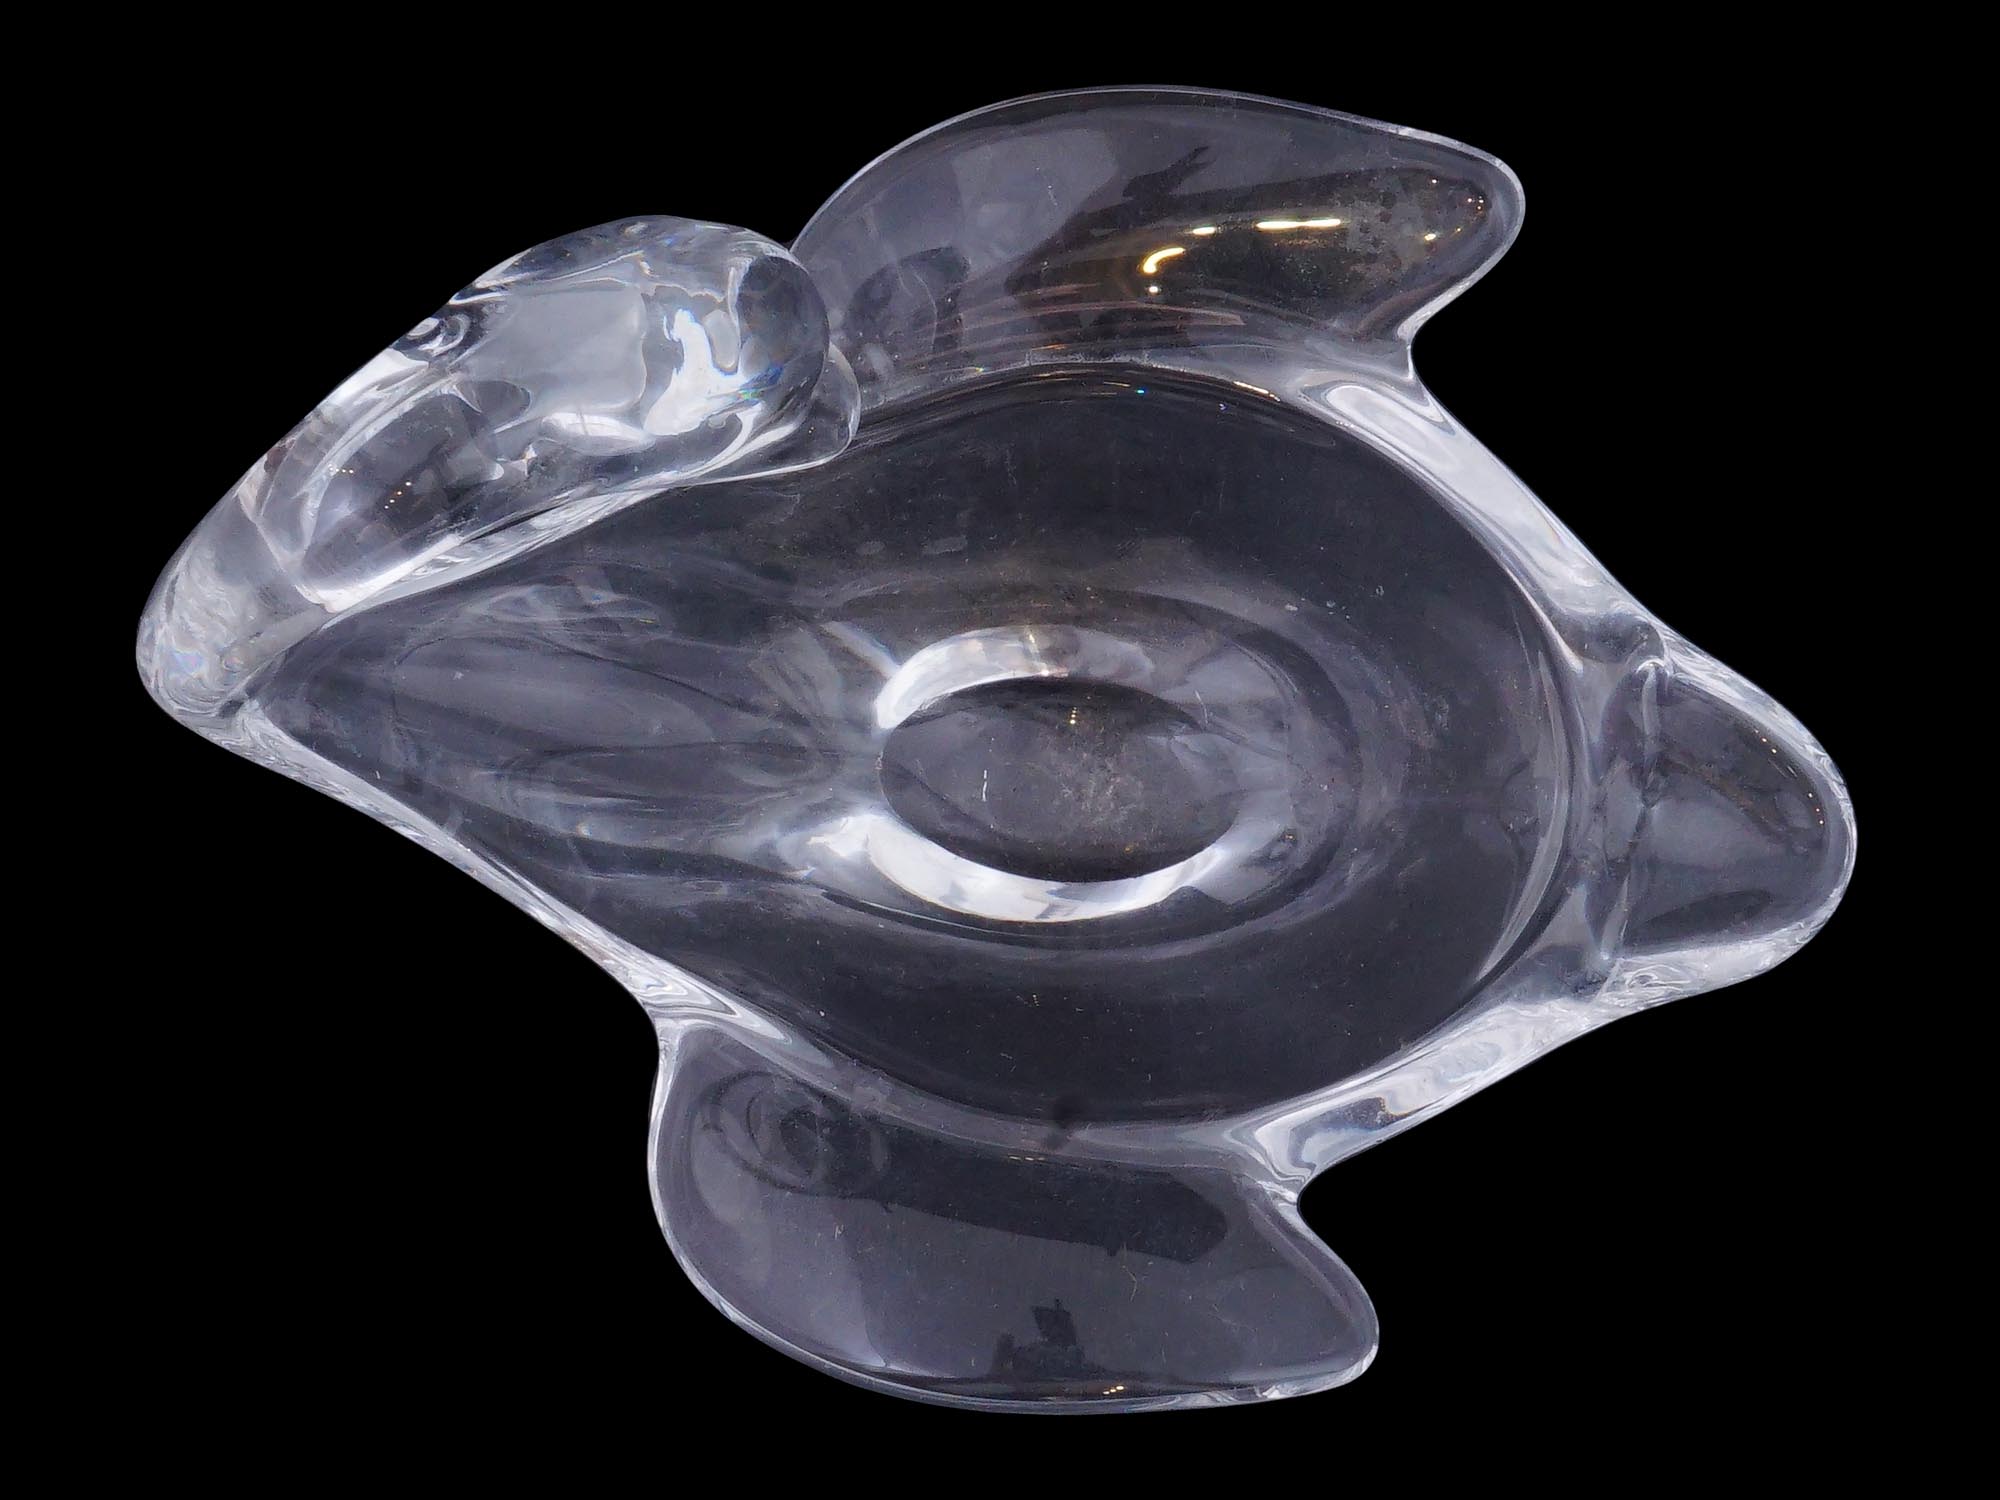 GROUP OF ANIMAL CUT GLASS SCULPTURAL CANDY DISH PIC-7